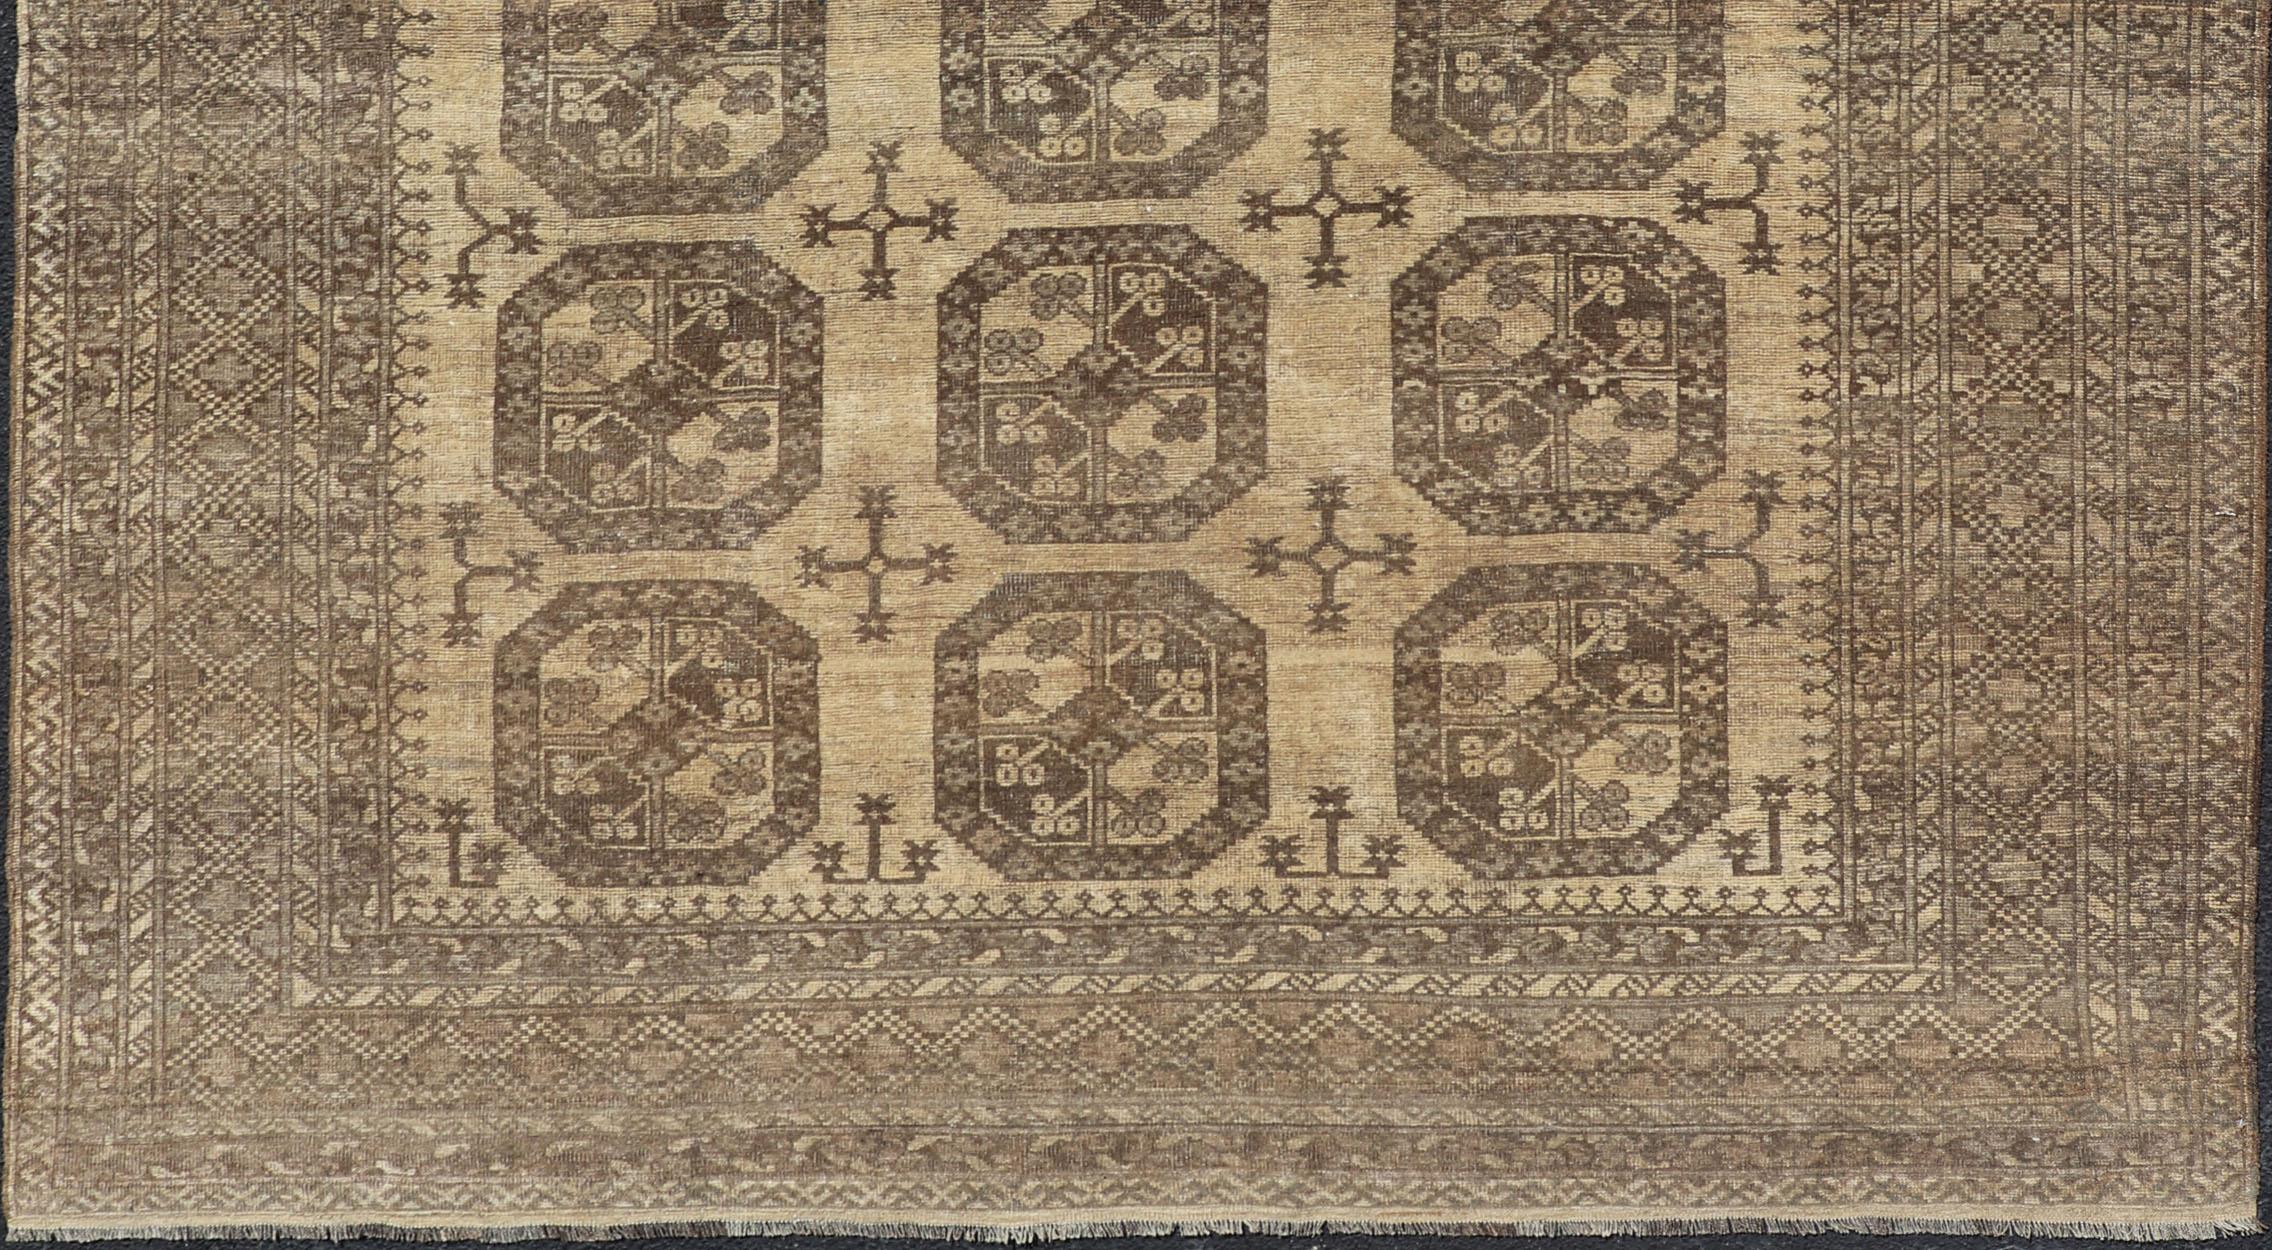 Hand-Knotted Vintage Turkomen Ersari Rug with Gul Design in Brown, Gray, Tan & Sand Colors For Sale